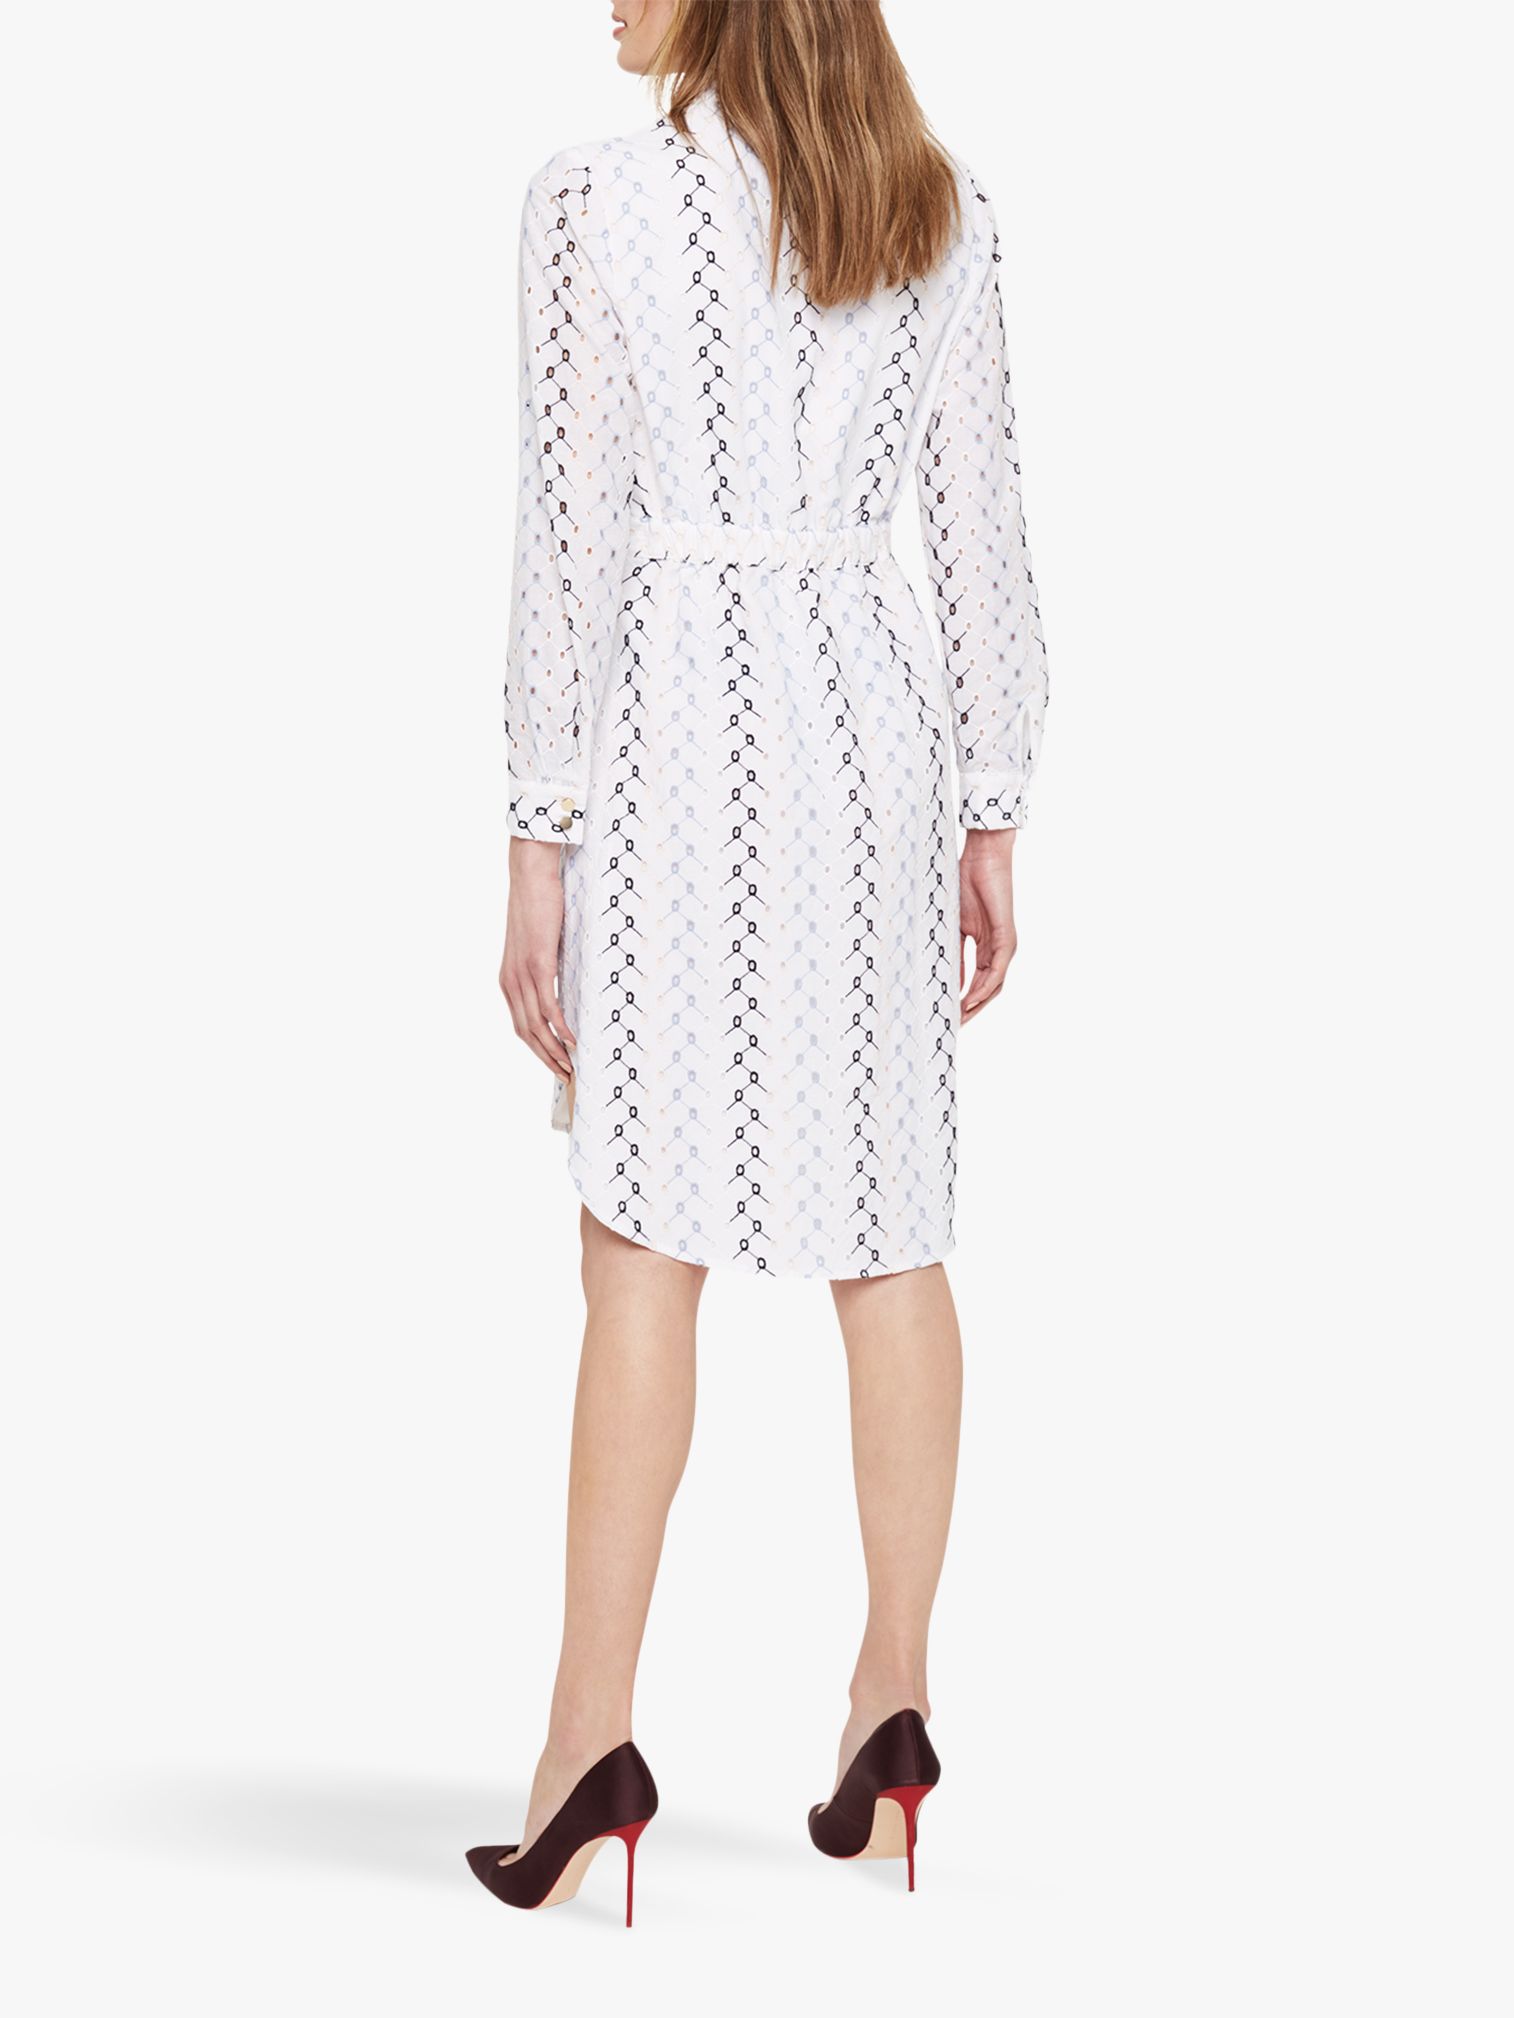 Damsel in a Dress Hannah Embroidered Dress, White/Multi at John Lewis & Partners